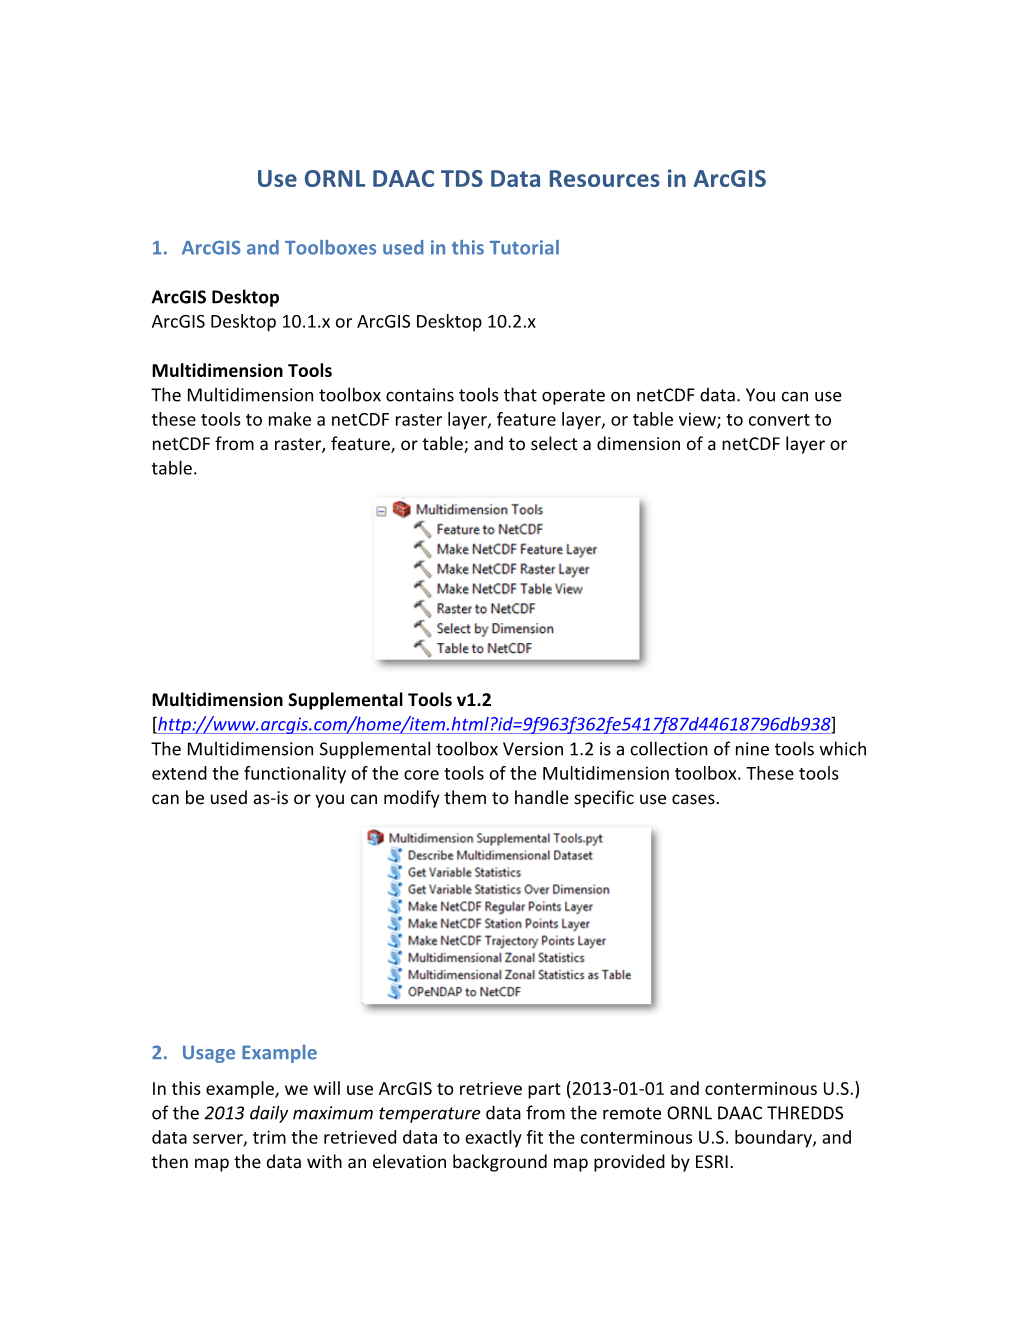 Use ORNL DAAC TDS Data Resources in Arcgis